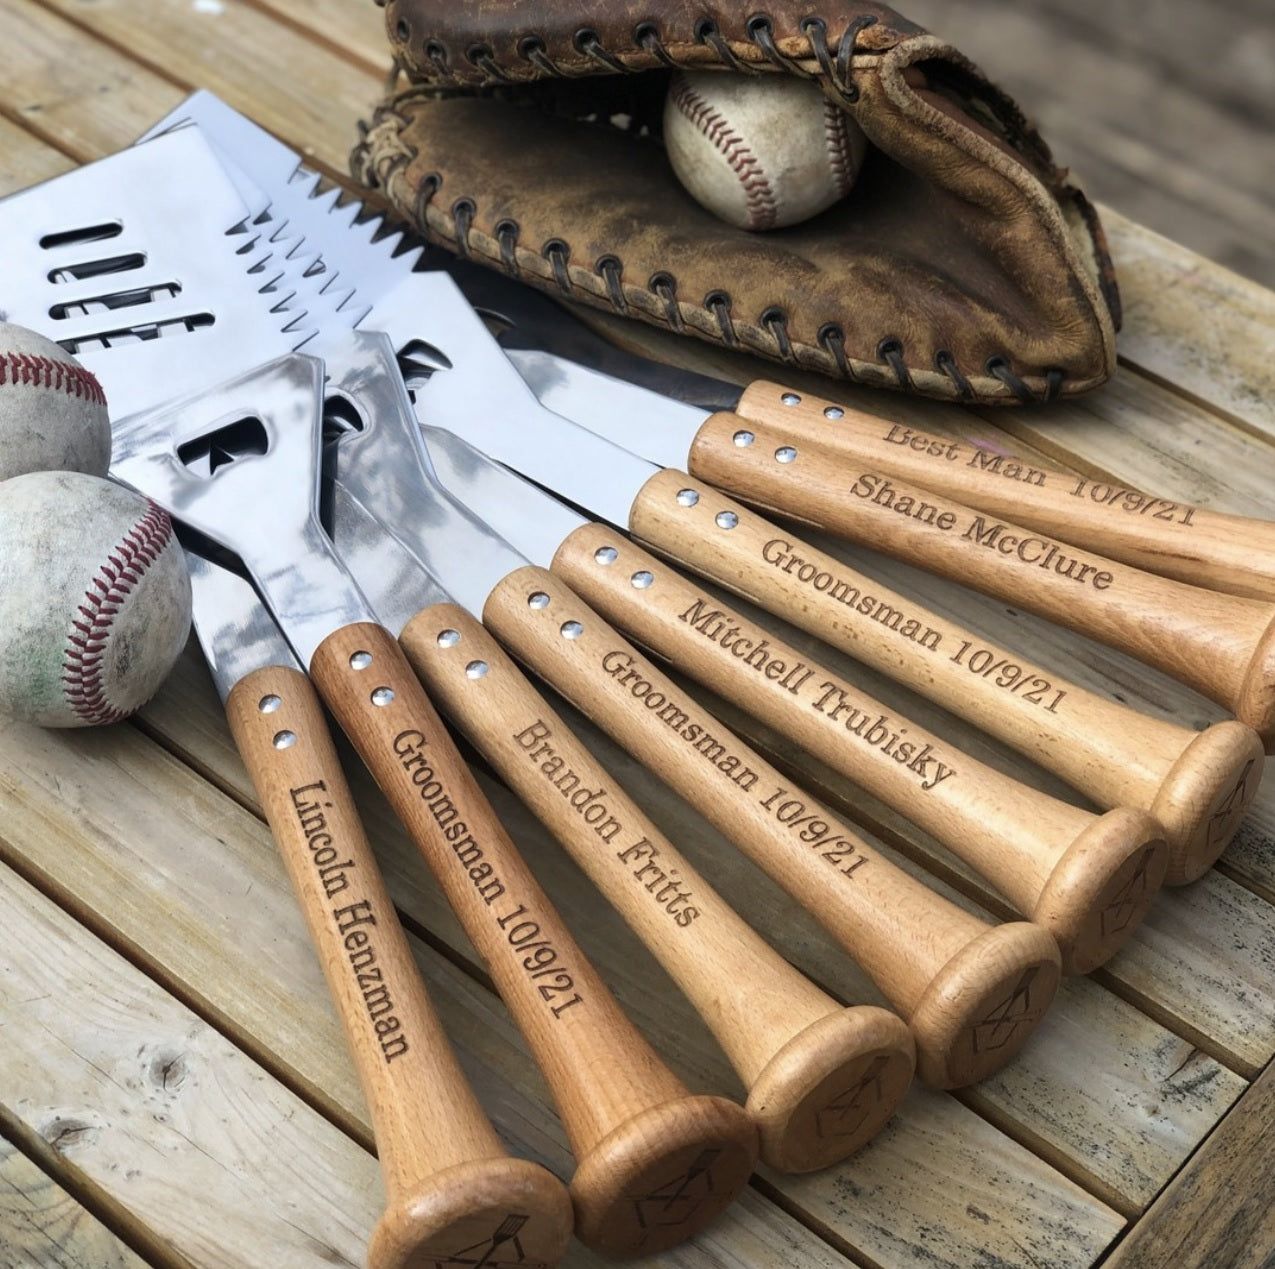 Unique Gift For Baseball Superfans – Lumberlend Co.®